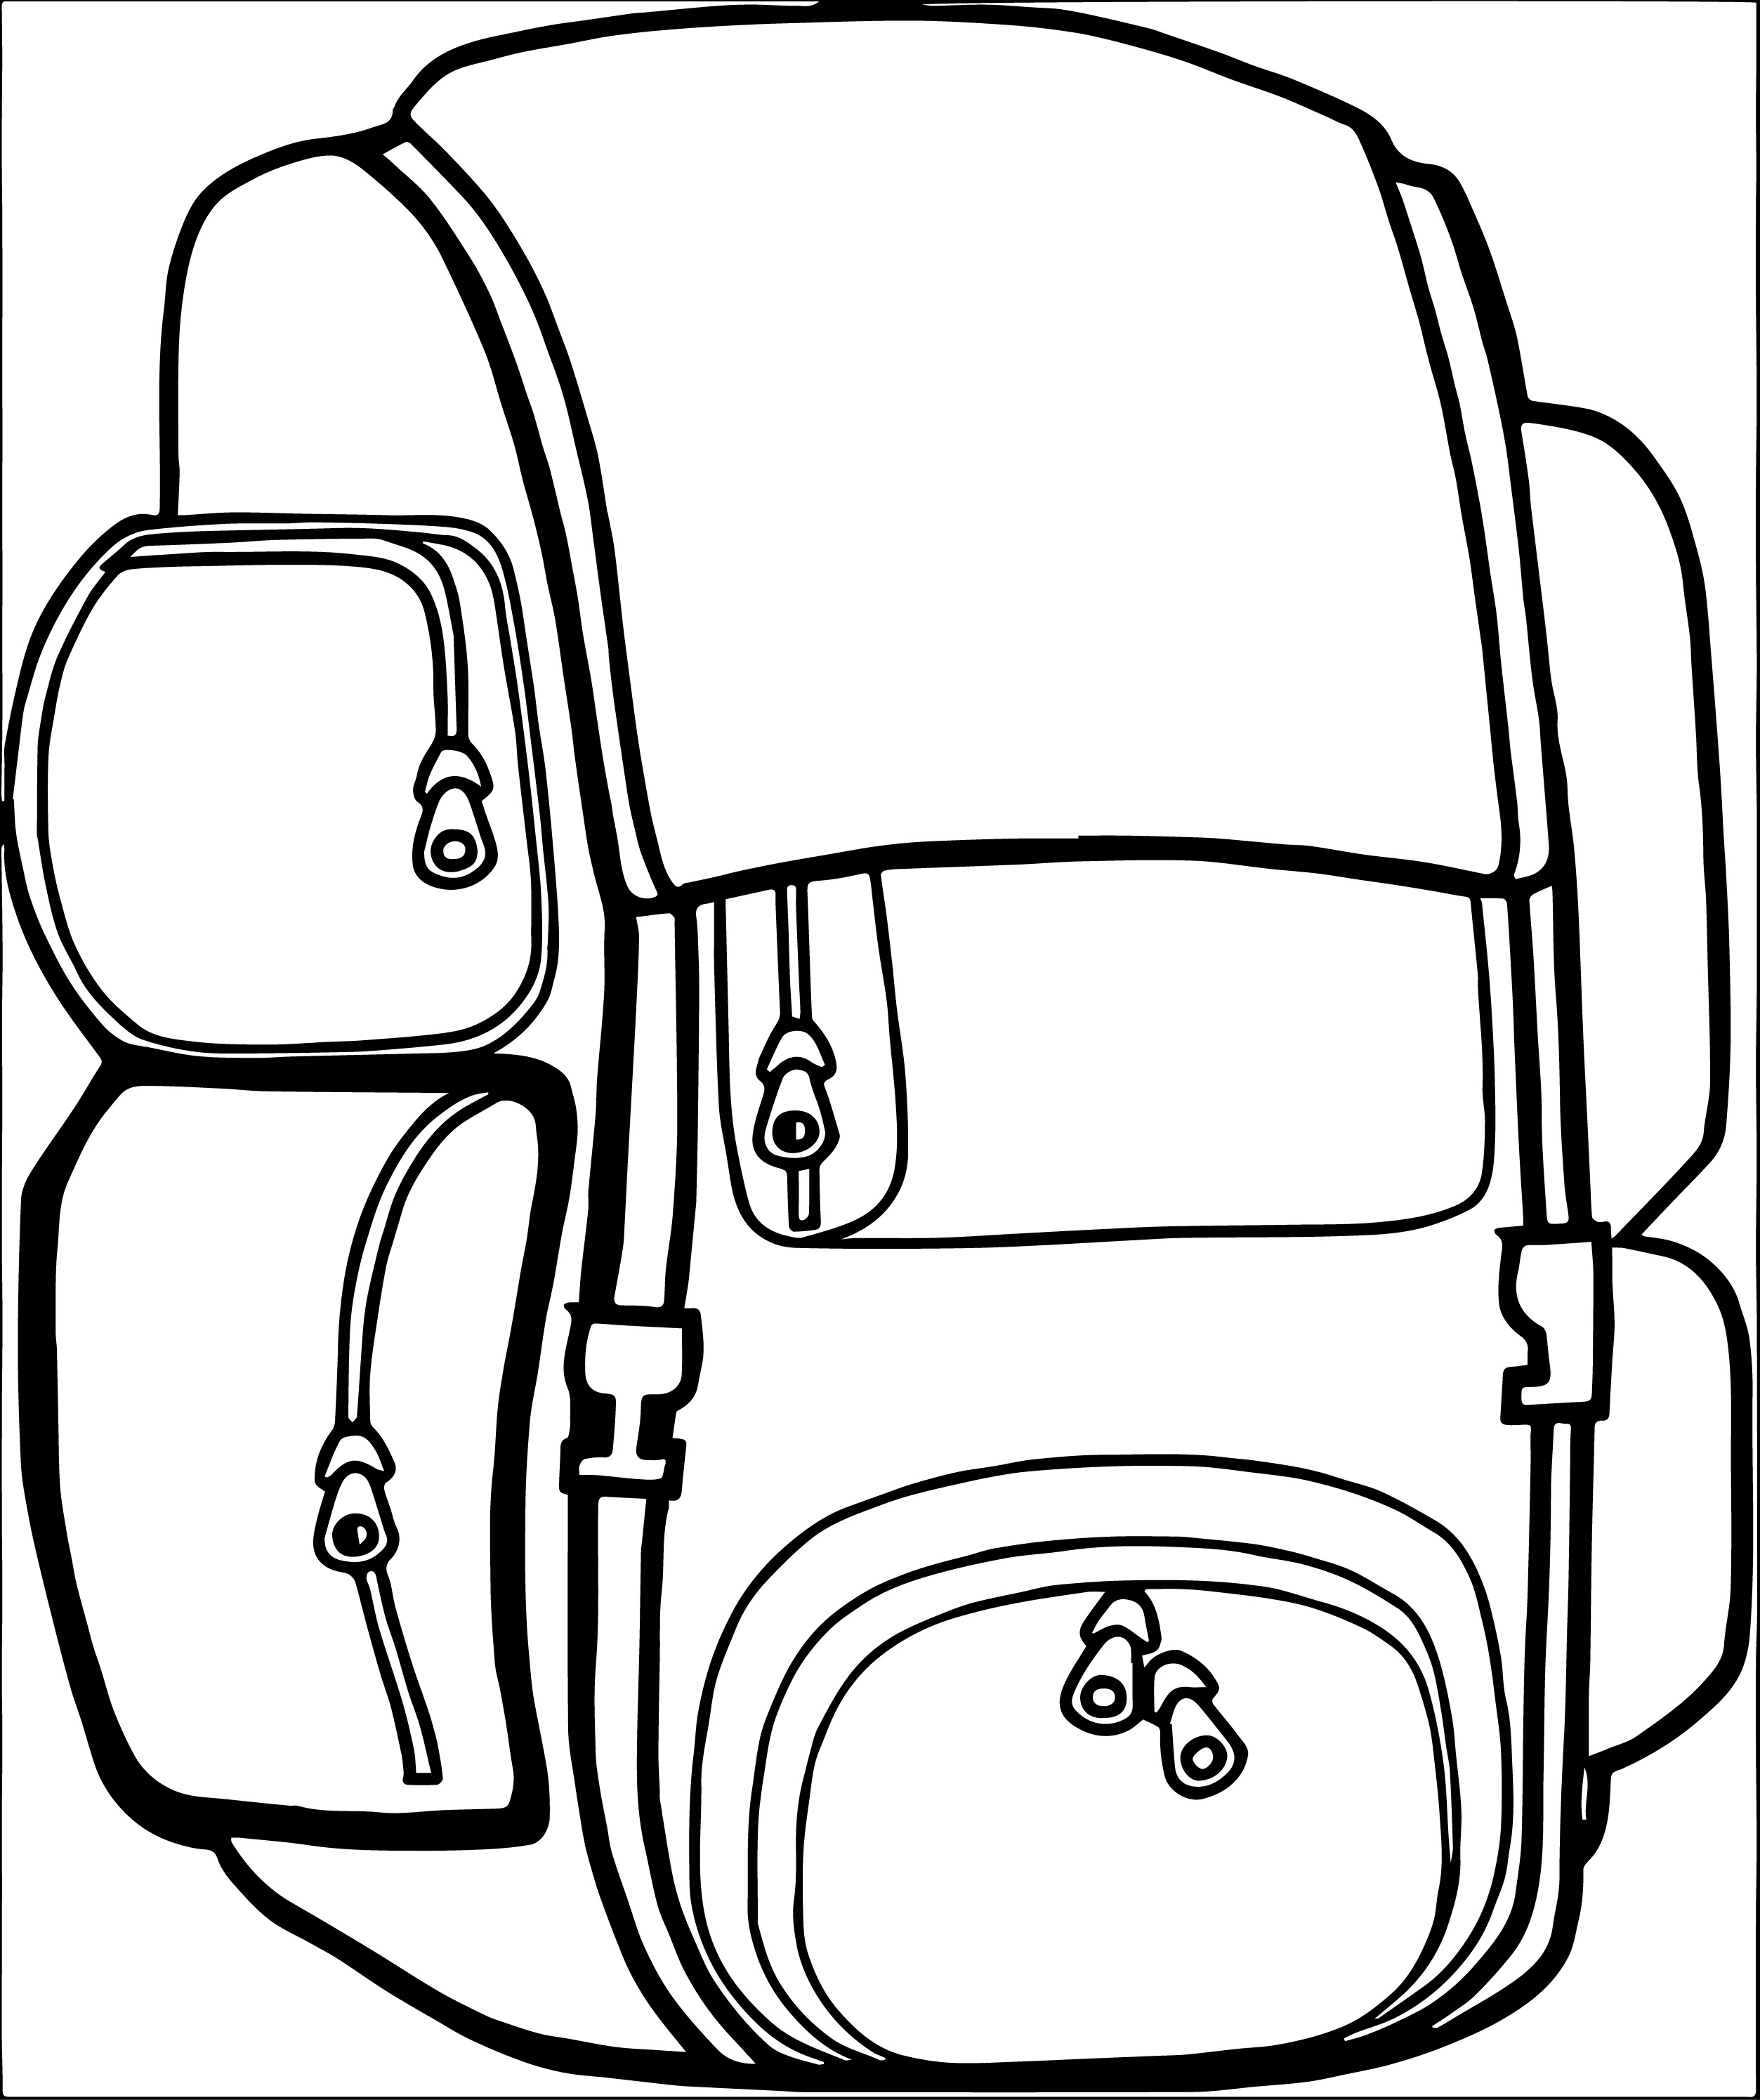 Backpack Coloring Page at GetColorings.com | Free printable colorings